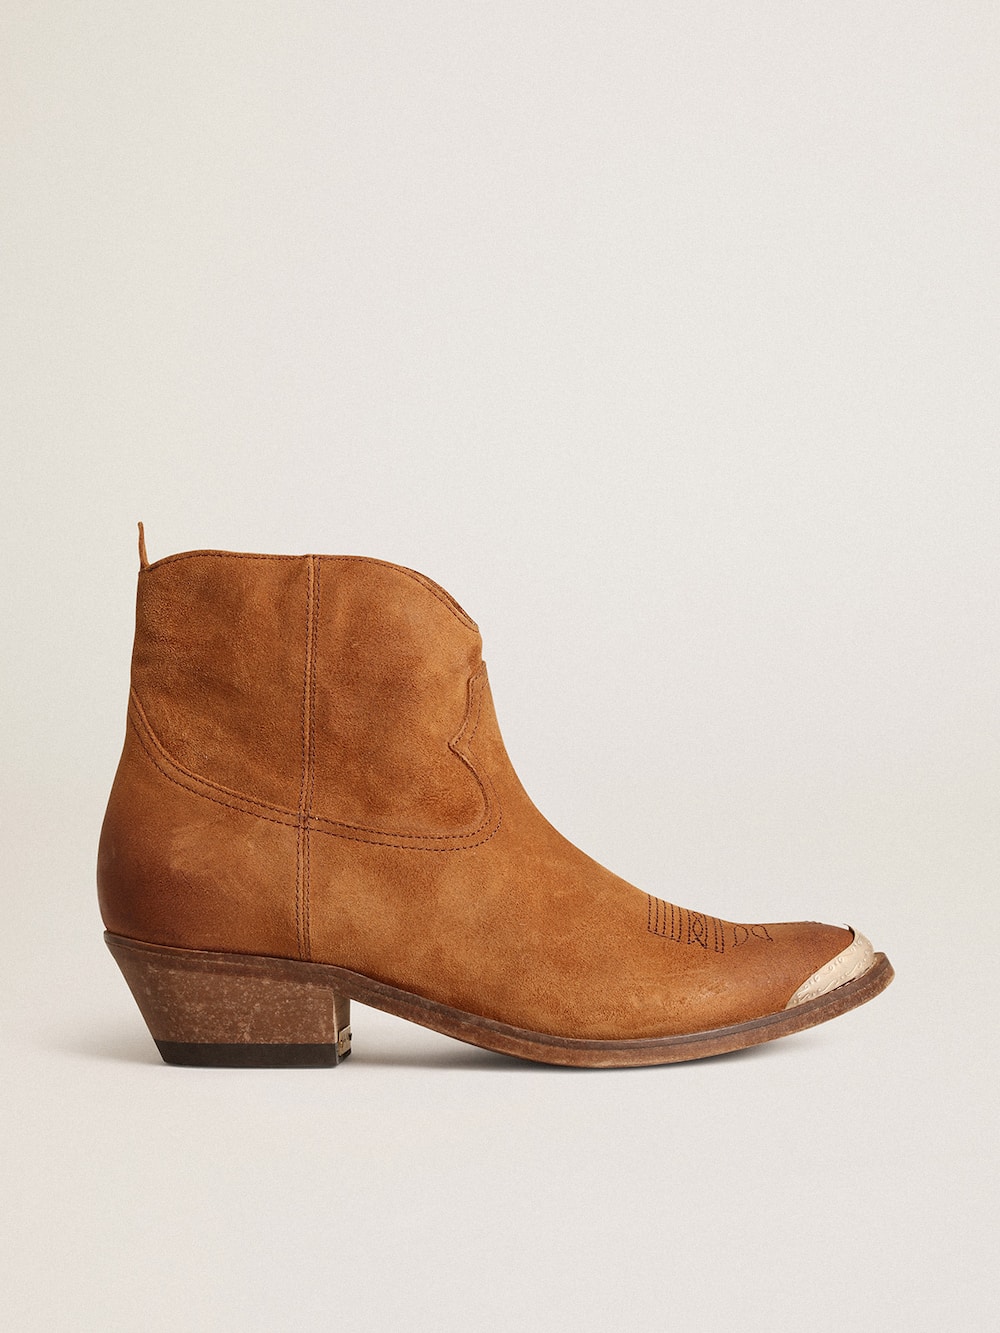 Golden Goose - Stivaletti Young in suede color cognac in 